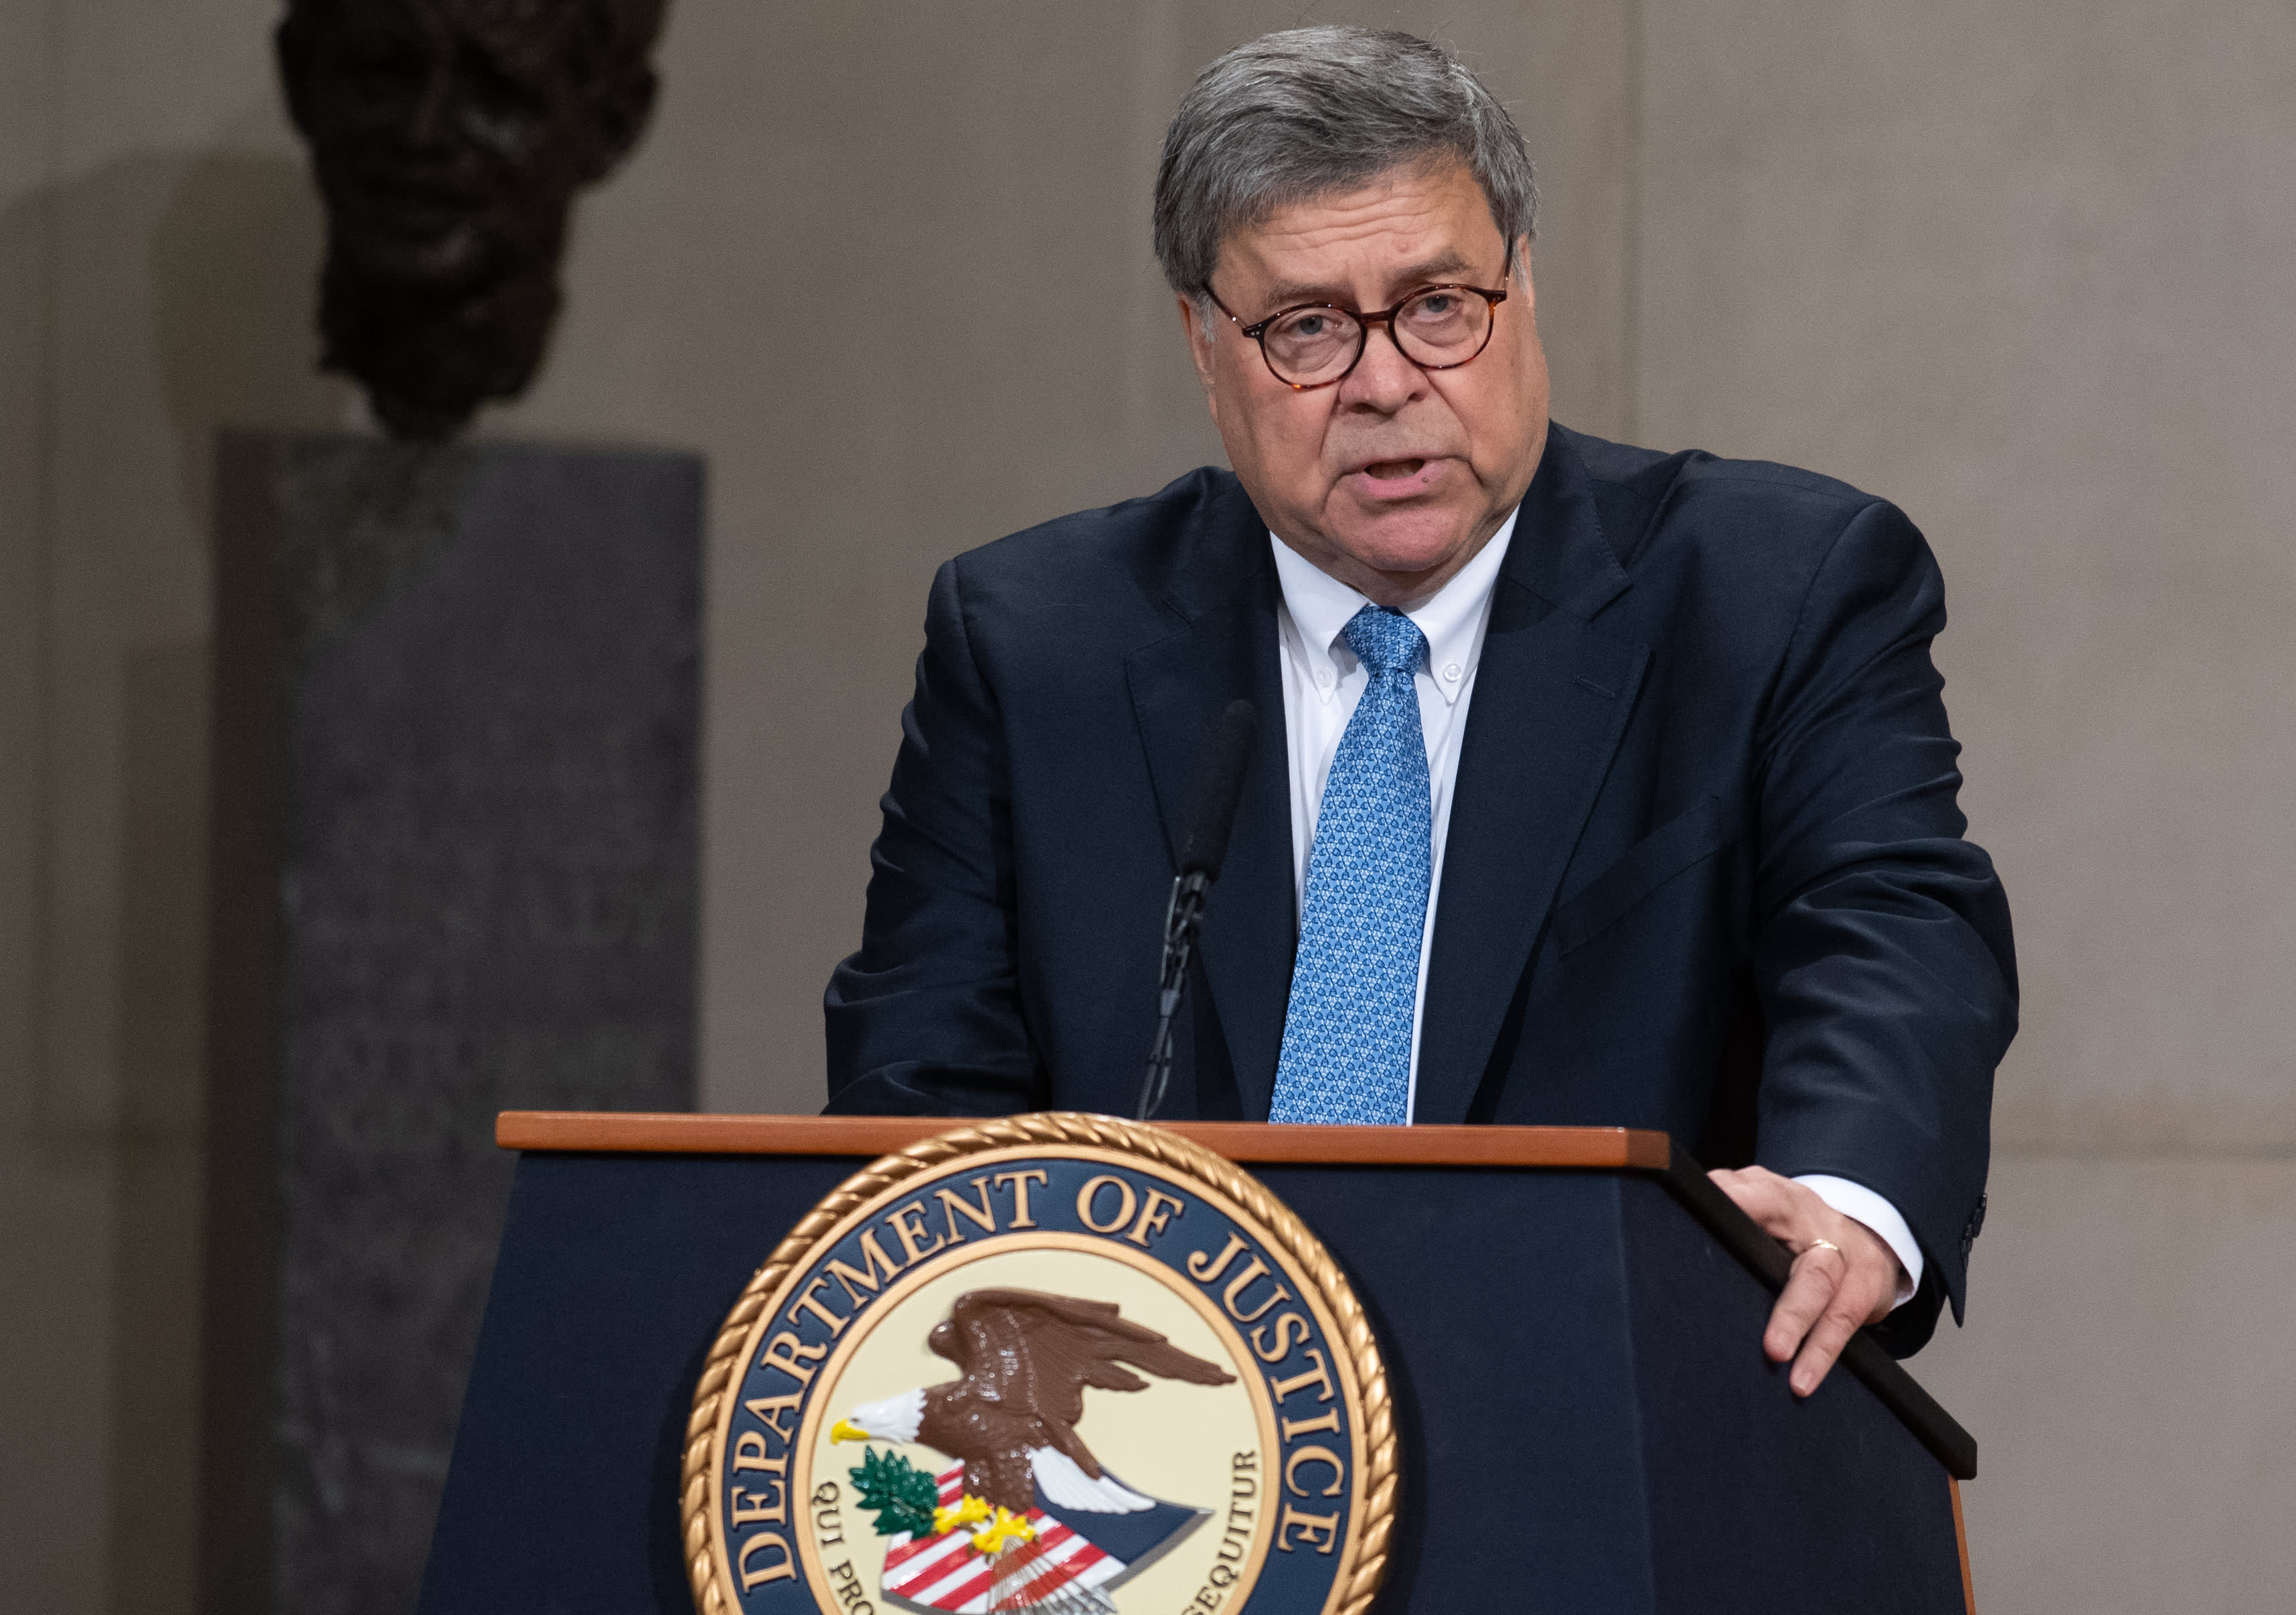 Attorney General William Barr orders first federal executions in nearly two decades